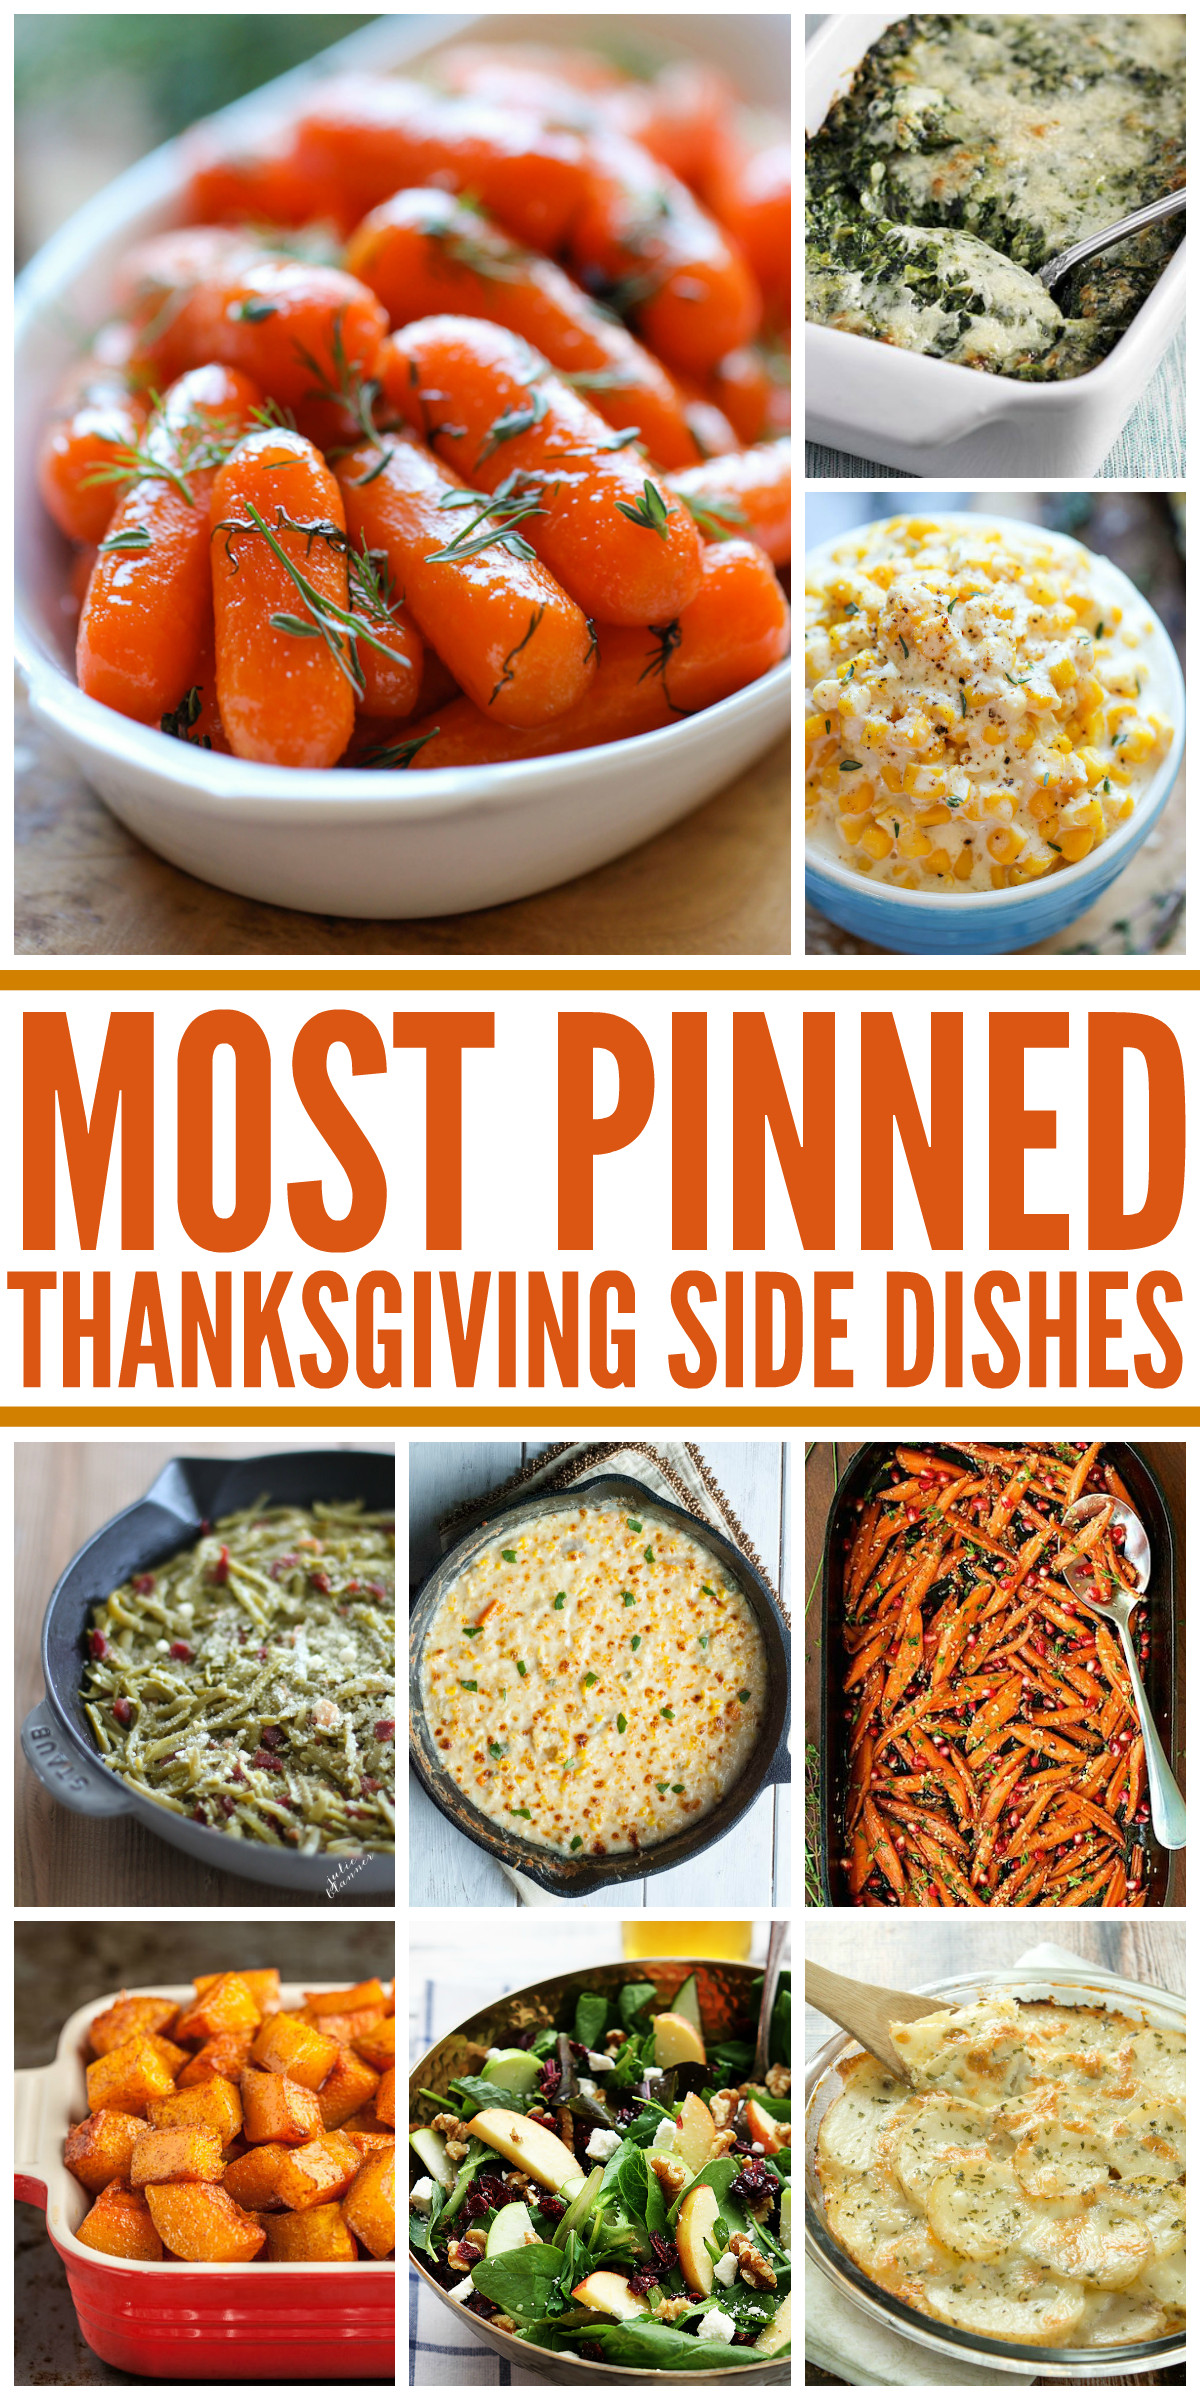 Thanksgiving Dinner Ideas
 25 Most Pinned Holiday Side Dishes